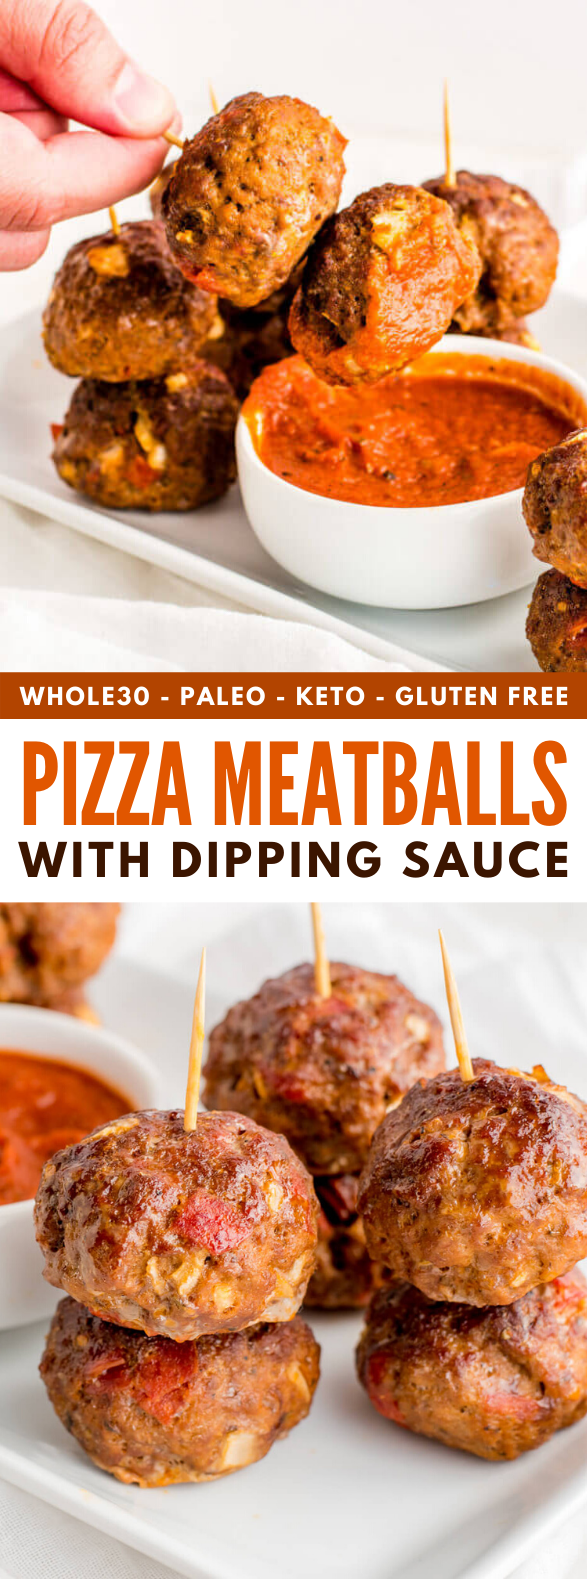 The Best Whole30 Pizza Meatballs #healthy #diet